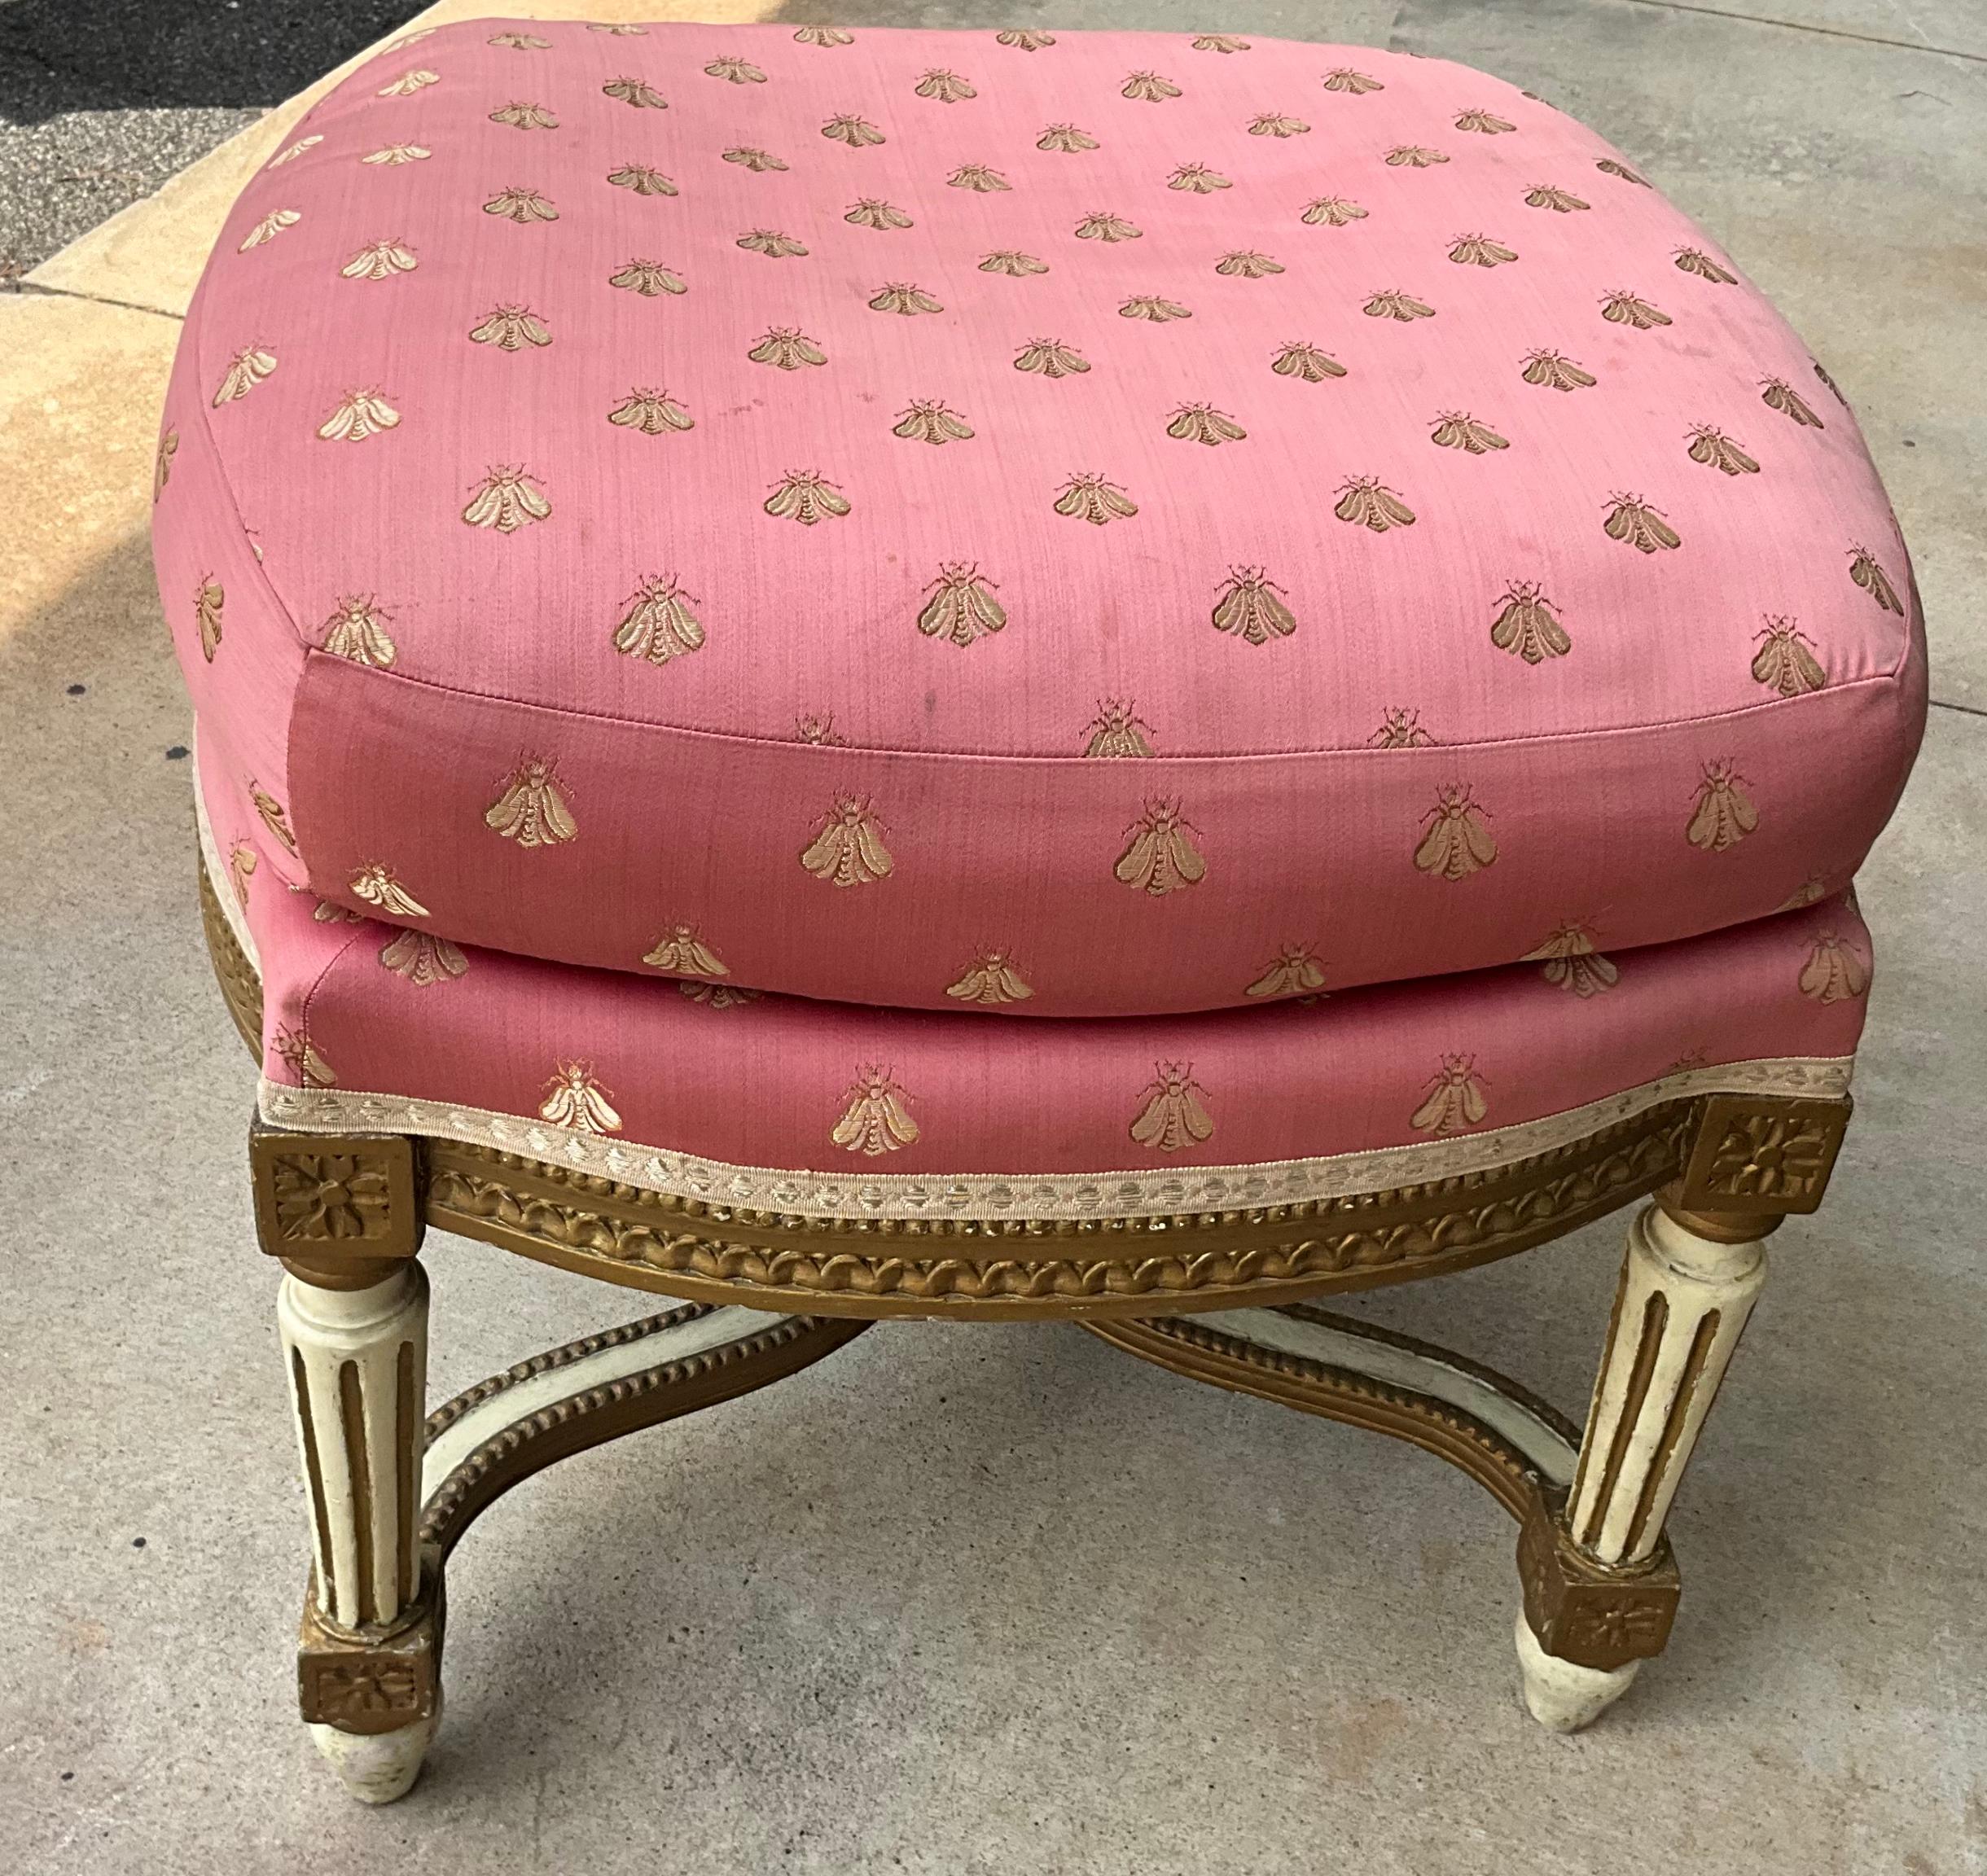  Mid-Century French Carved Giltwood and Painted Ottoman In Pink Silk For Sale 1